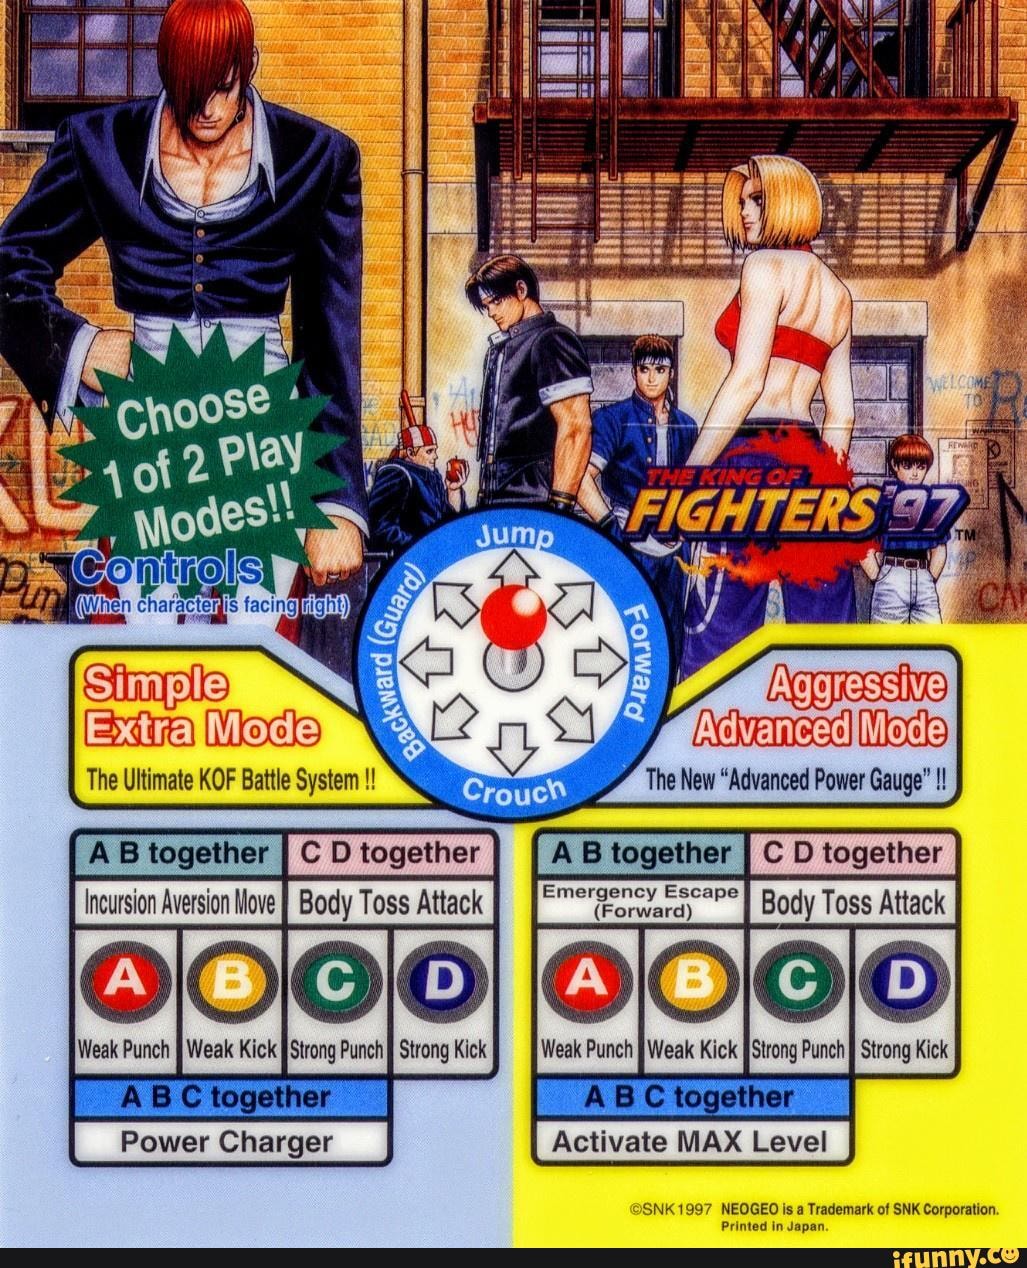 Arcade needs quarters badly! — King of Fighters '97 manhwa Vol. 28 feat.  the